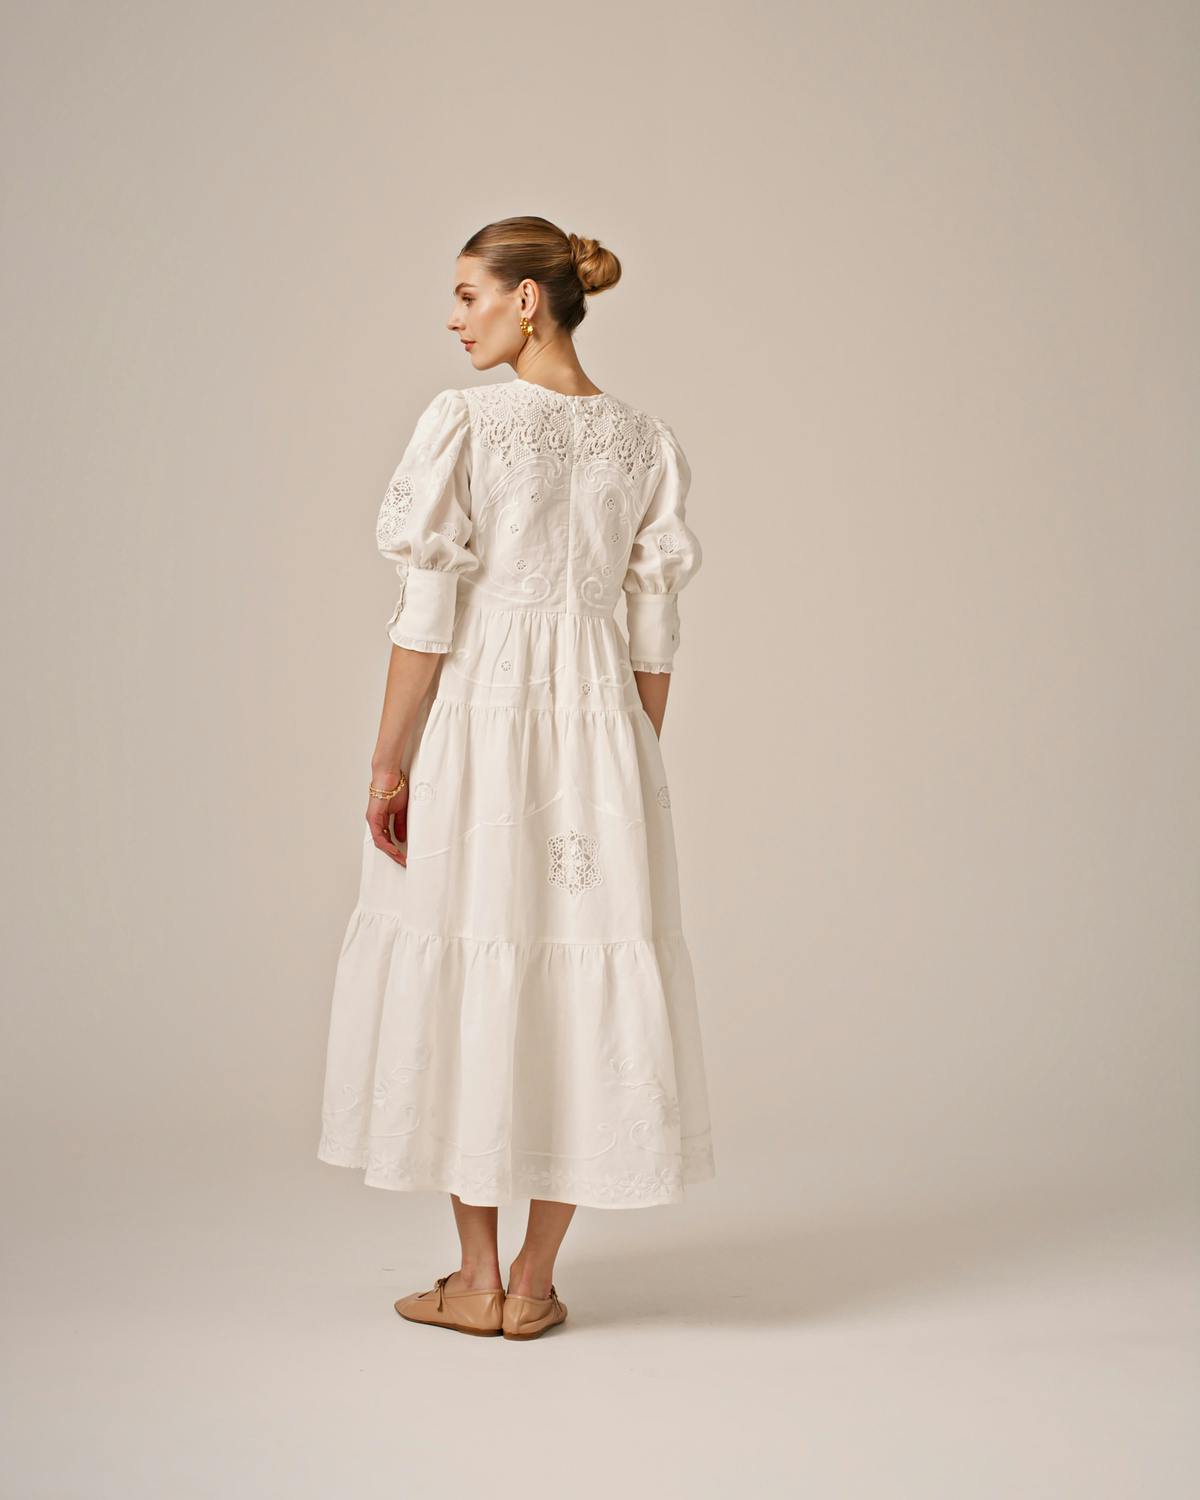 Linen Embroidery Gown, White. Image #3